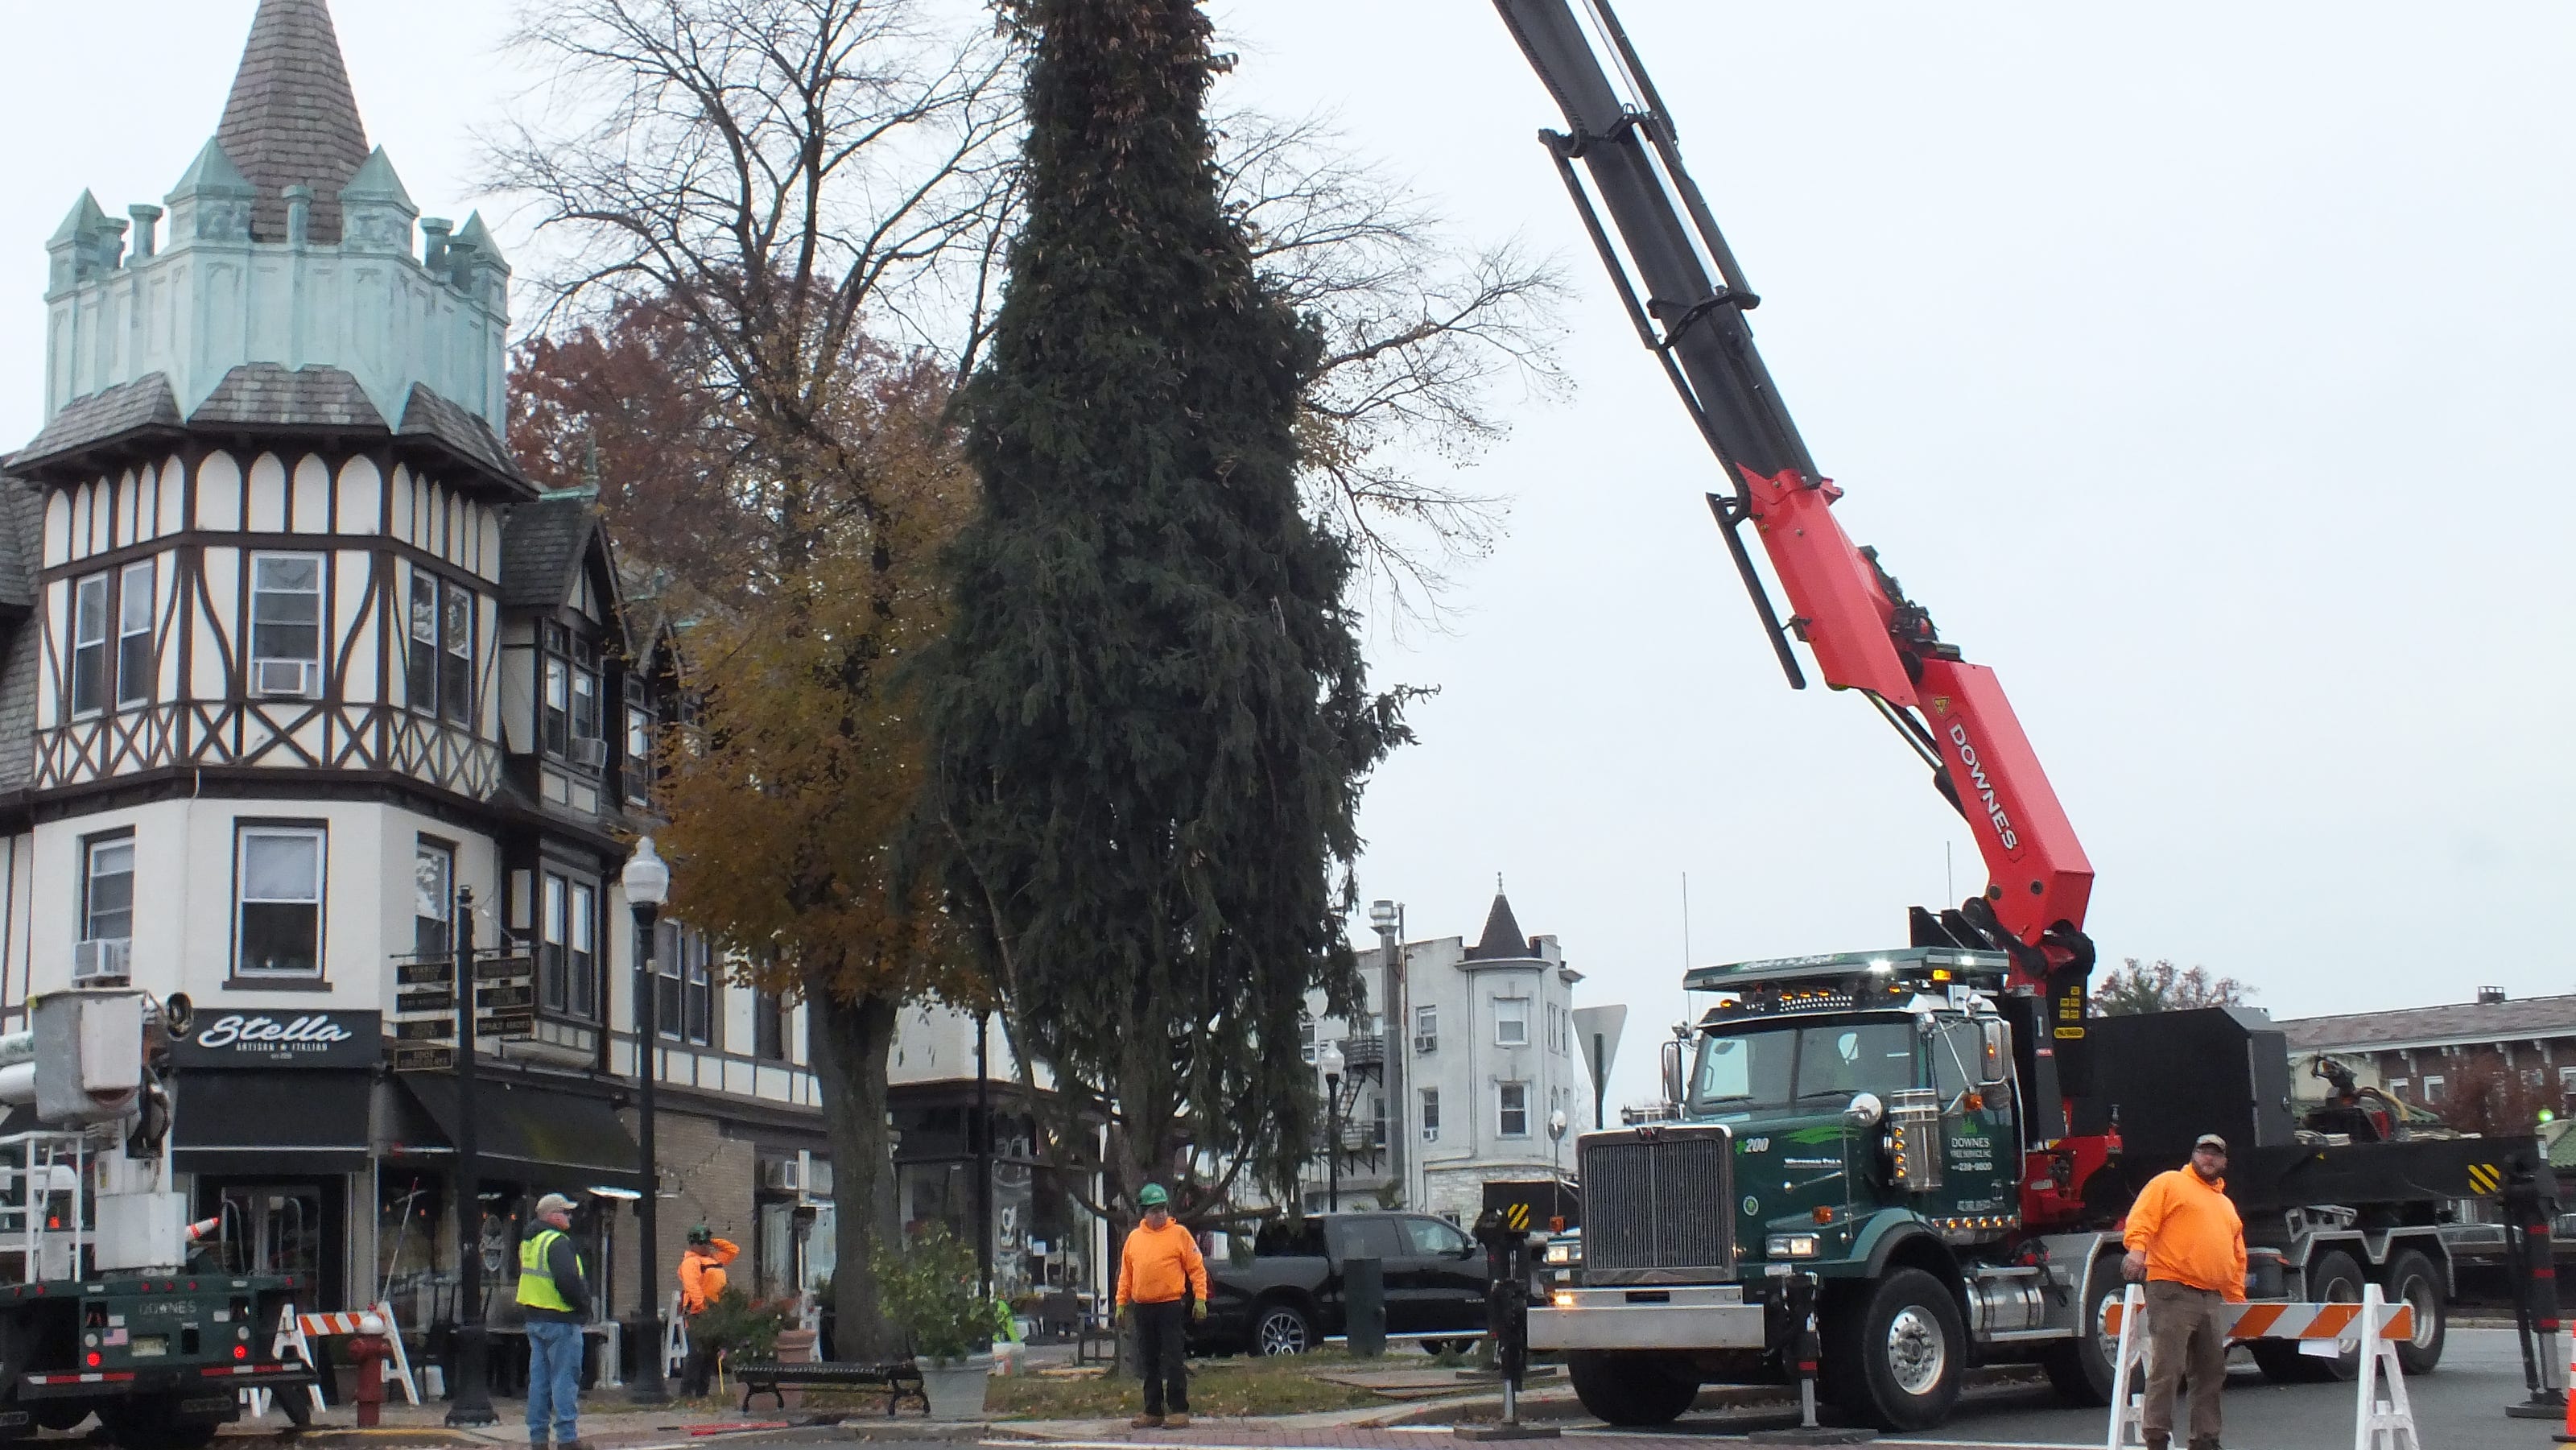 When is the Ridgewood tree lighting in 2021? The tree arrives